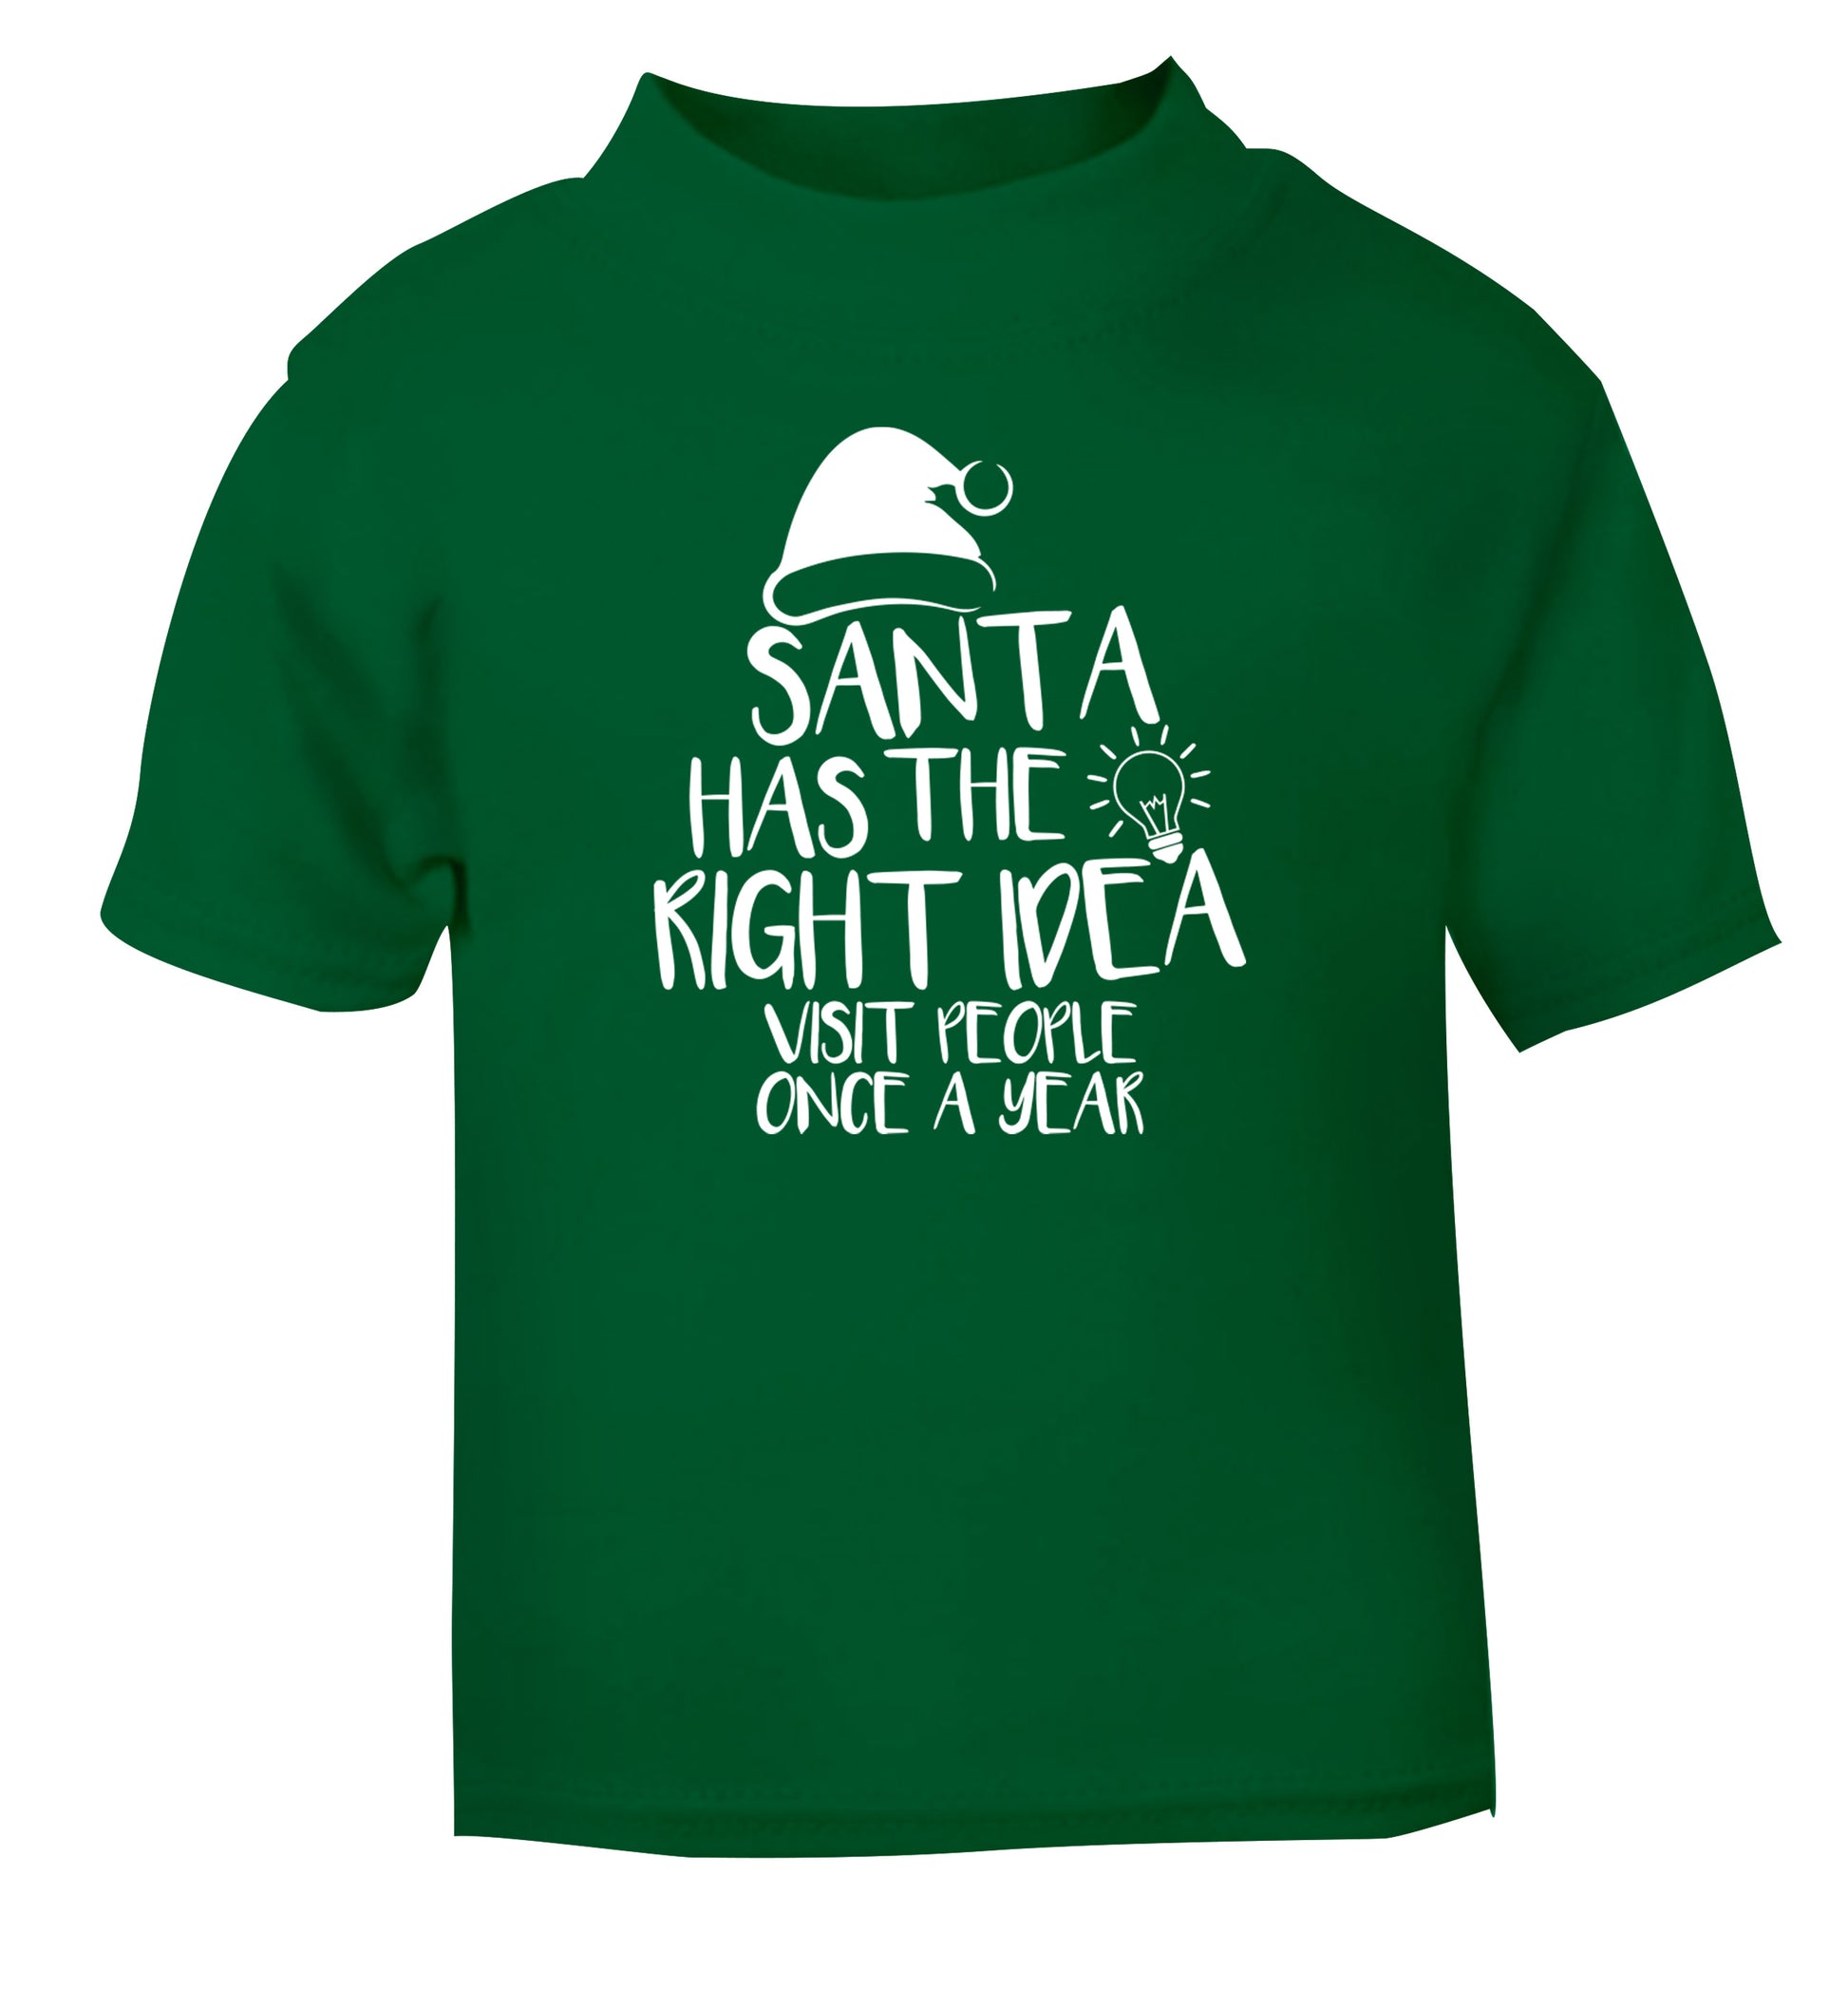 Santa has the right idea visit people once a year green Baby Toddler Tshirt 2 Years